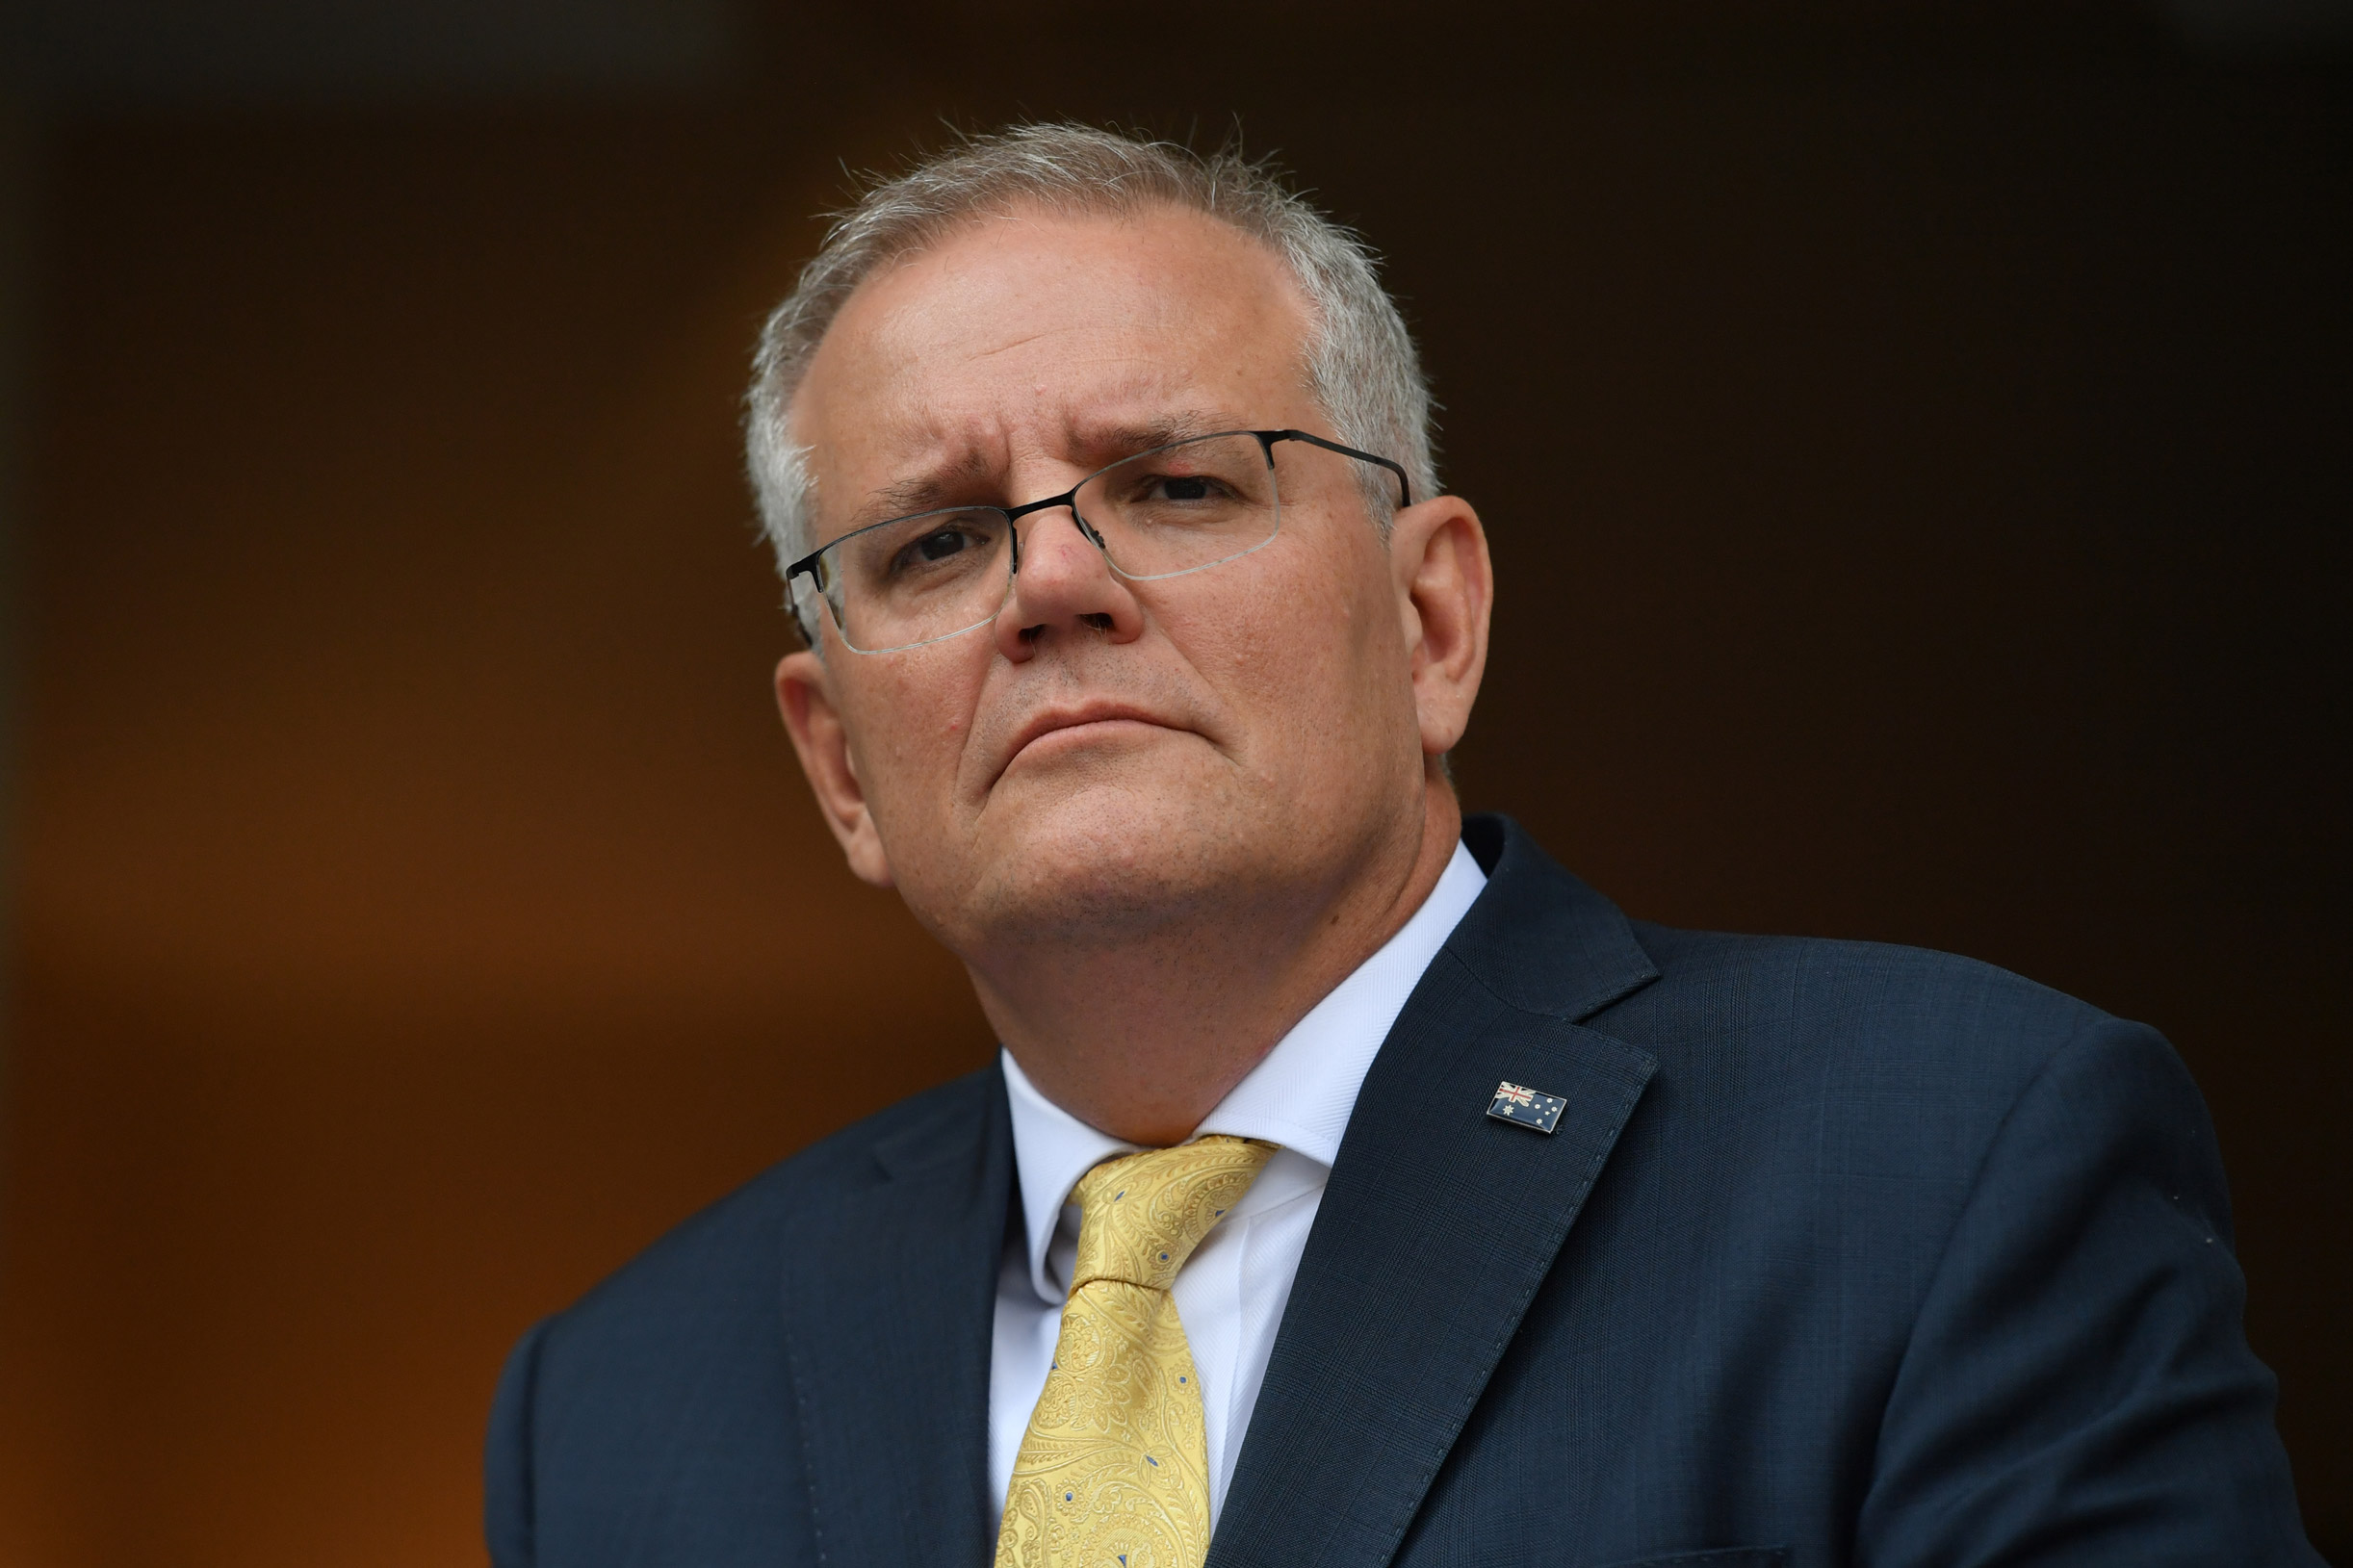 Australian Prime Minister Scott Morrison is seen at a press conference in Canberra, Mar. 1.